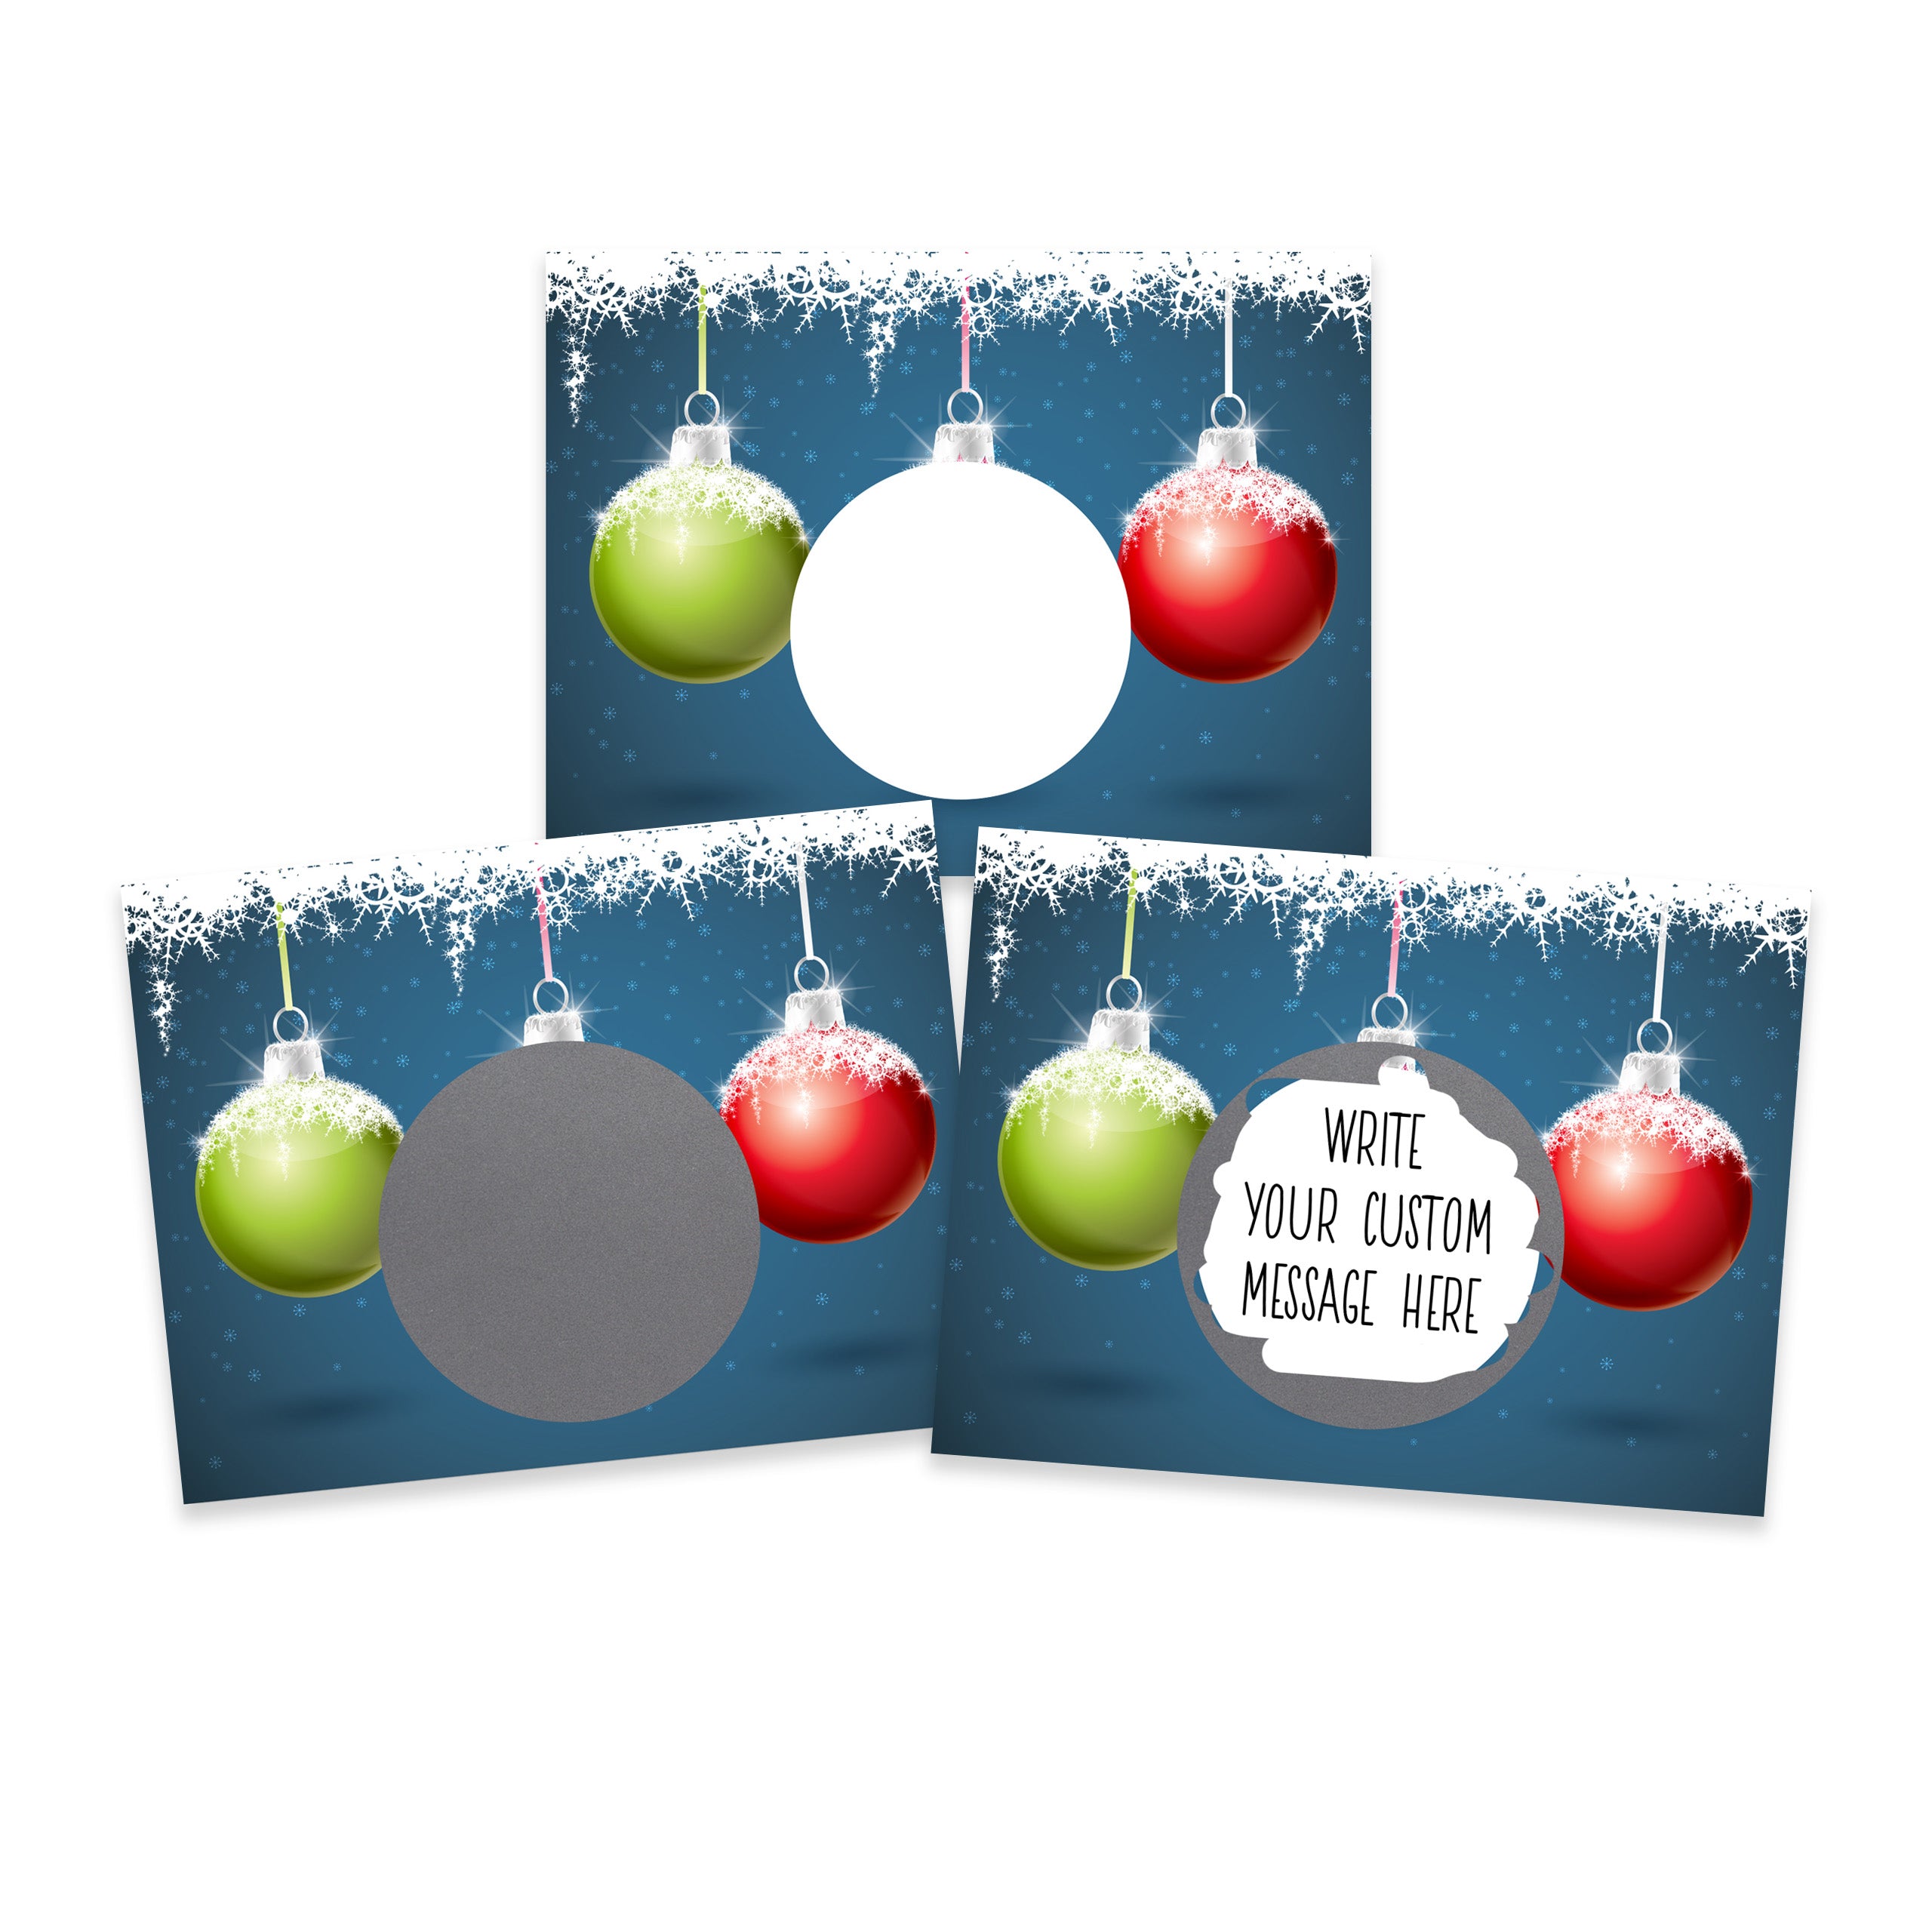 DIY Christmas Holiday Ornament Make Your Own Scratch Offs - 20 Cards and 20 Scratch Off Stickers - My Scratch Offs